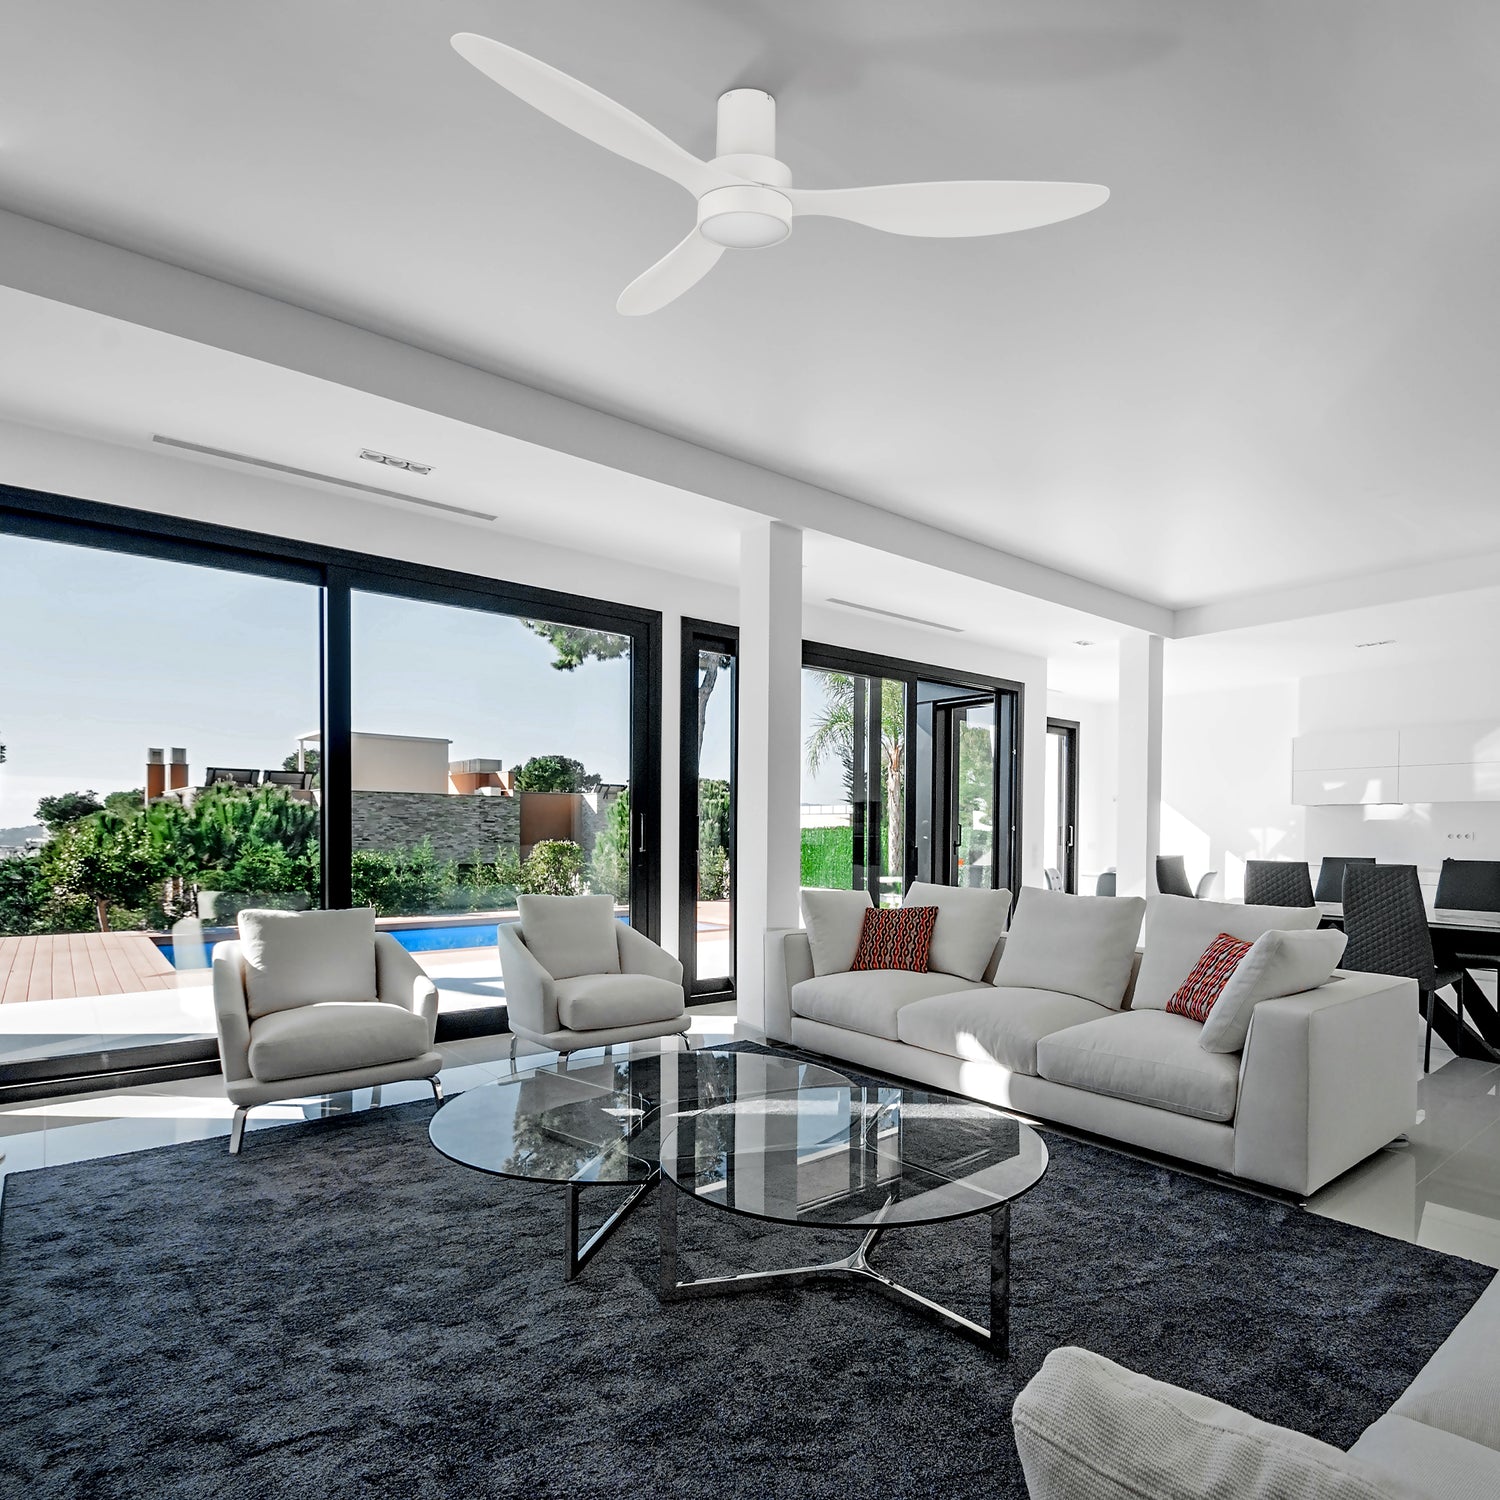 This Coleman 52&quot; smart ceiling fan keeps your space cool, bright, and stylish. It is a soft modern masterpiece perfect for your indoor living spaces. This Wifi smart ceiling fan is a simplicity designing with white finish, use very strong ABS blades and has an integrated 5700K LED day light. The fan features Remote control, Wi-Fi apps, Siri Shortcut and Voice control technology (compatible with Amazon Alexa and Google Home Assistant ) to set fan preferences. 